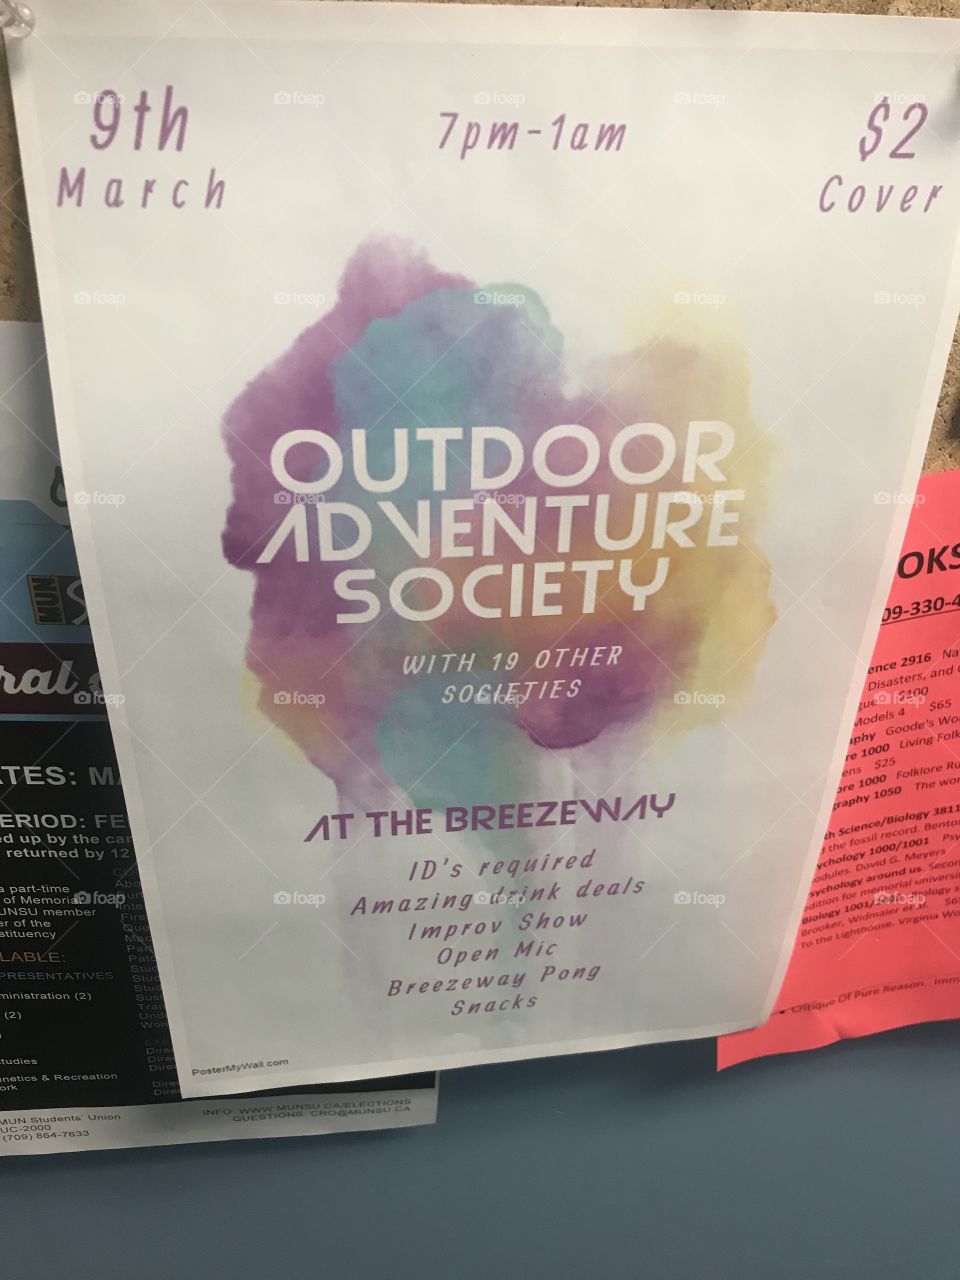 A poster advertising an event for the MUN outdoor adventure society based out of the St. John’s, NL (Newfoundland), Atlantic canadian campus. It says 19 other societies are a part of it. Great example of modern student club/society advertising 